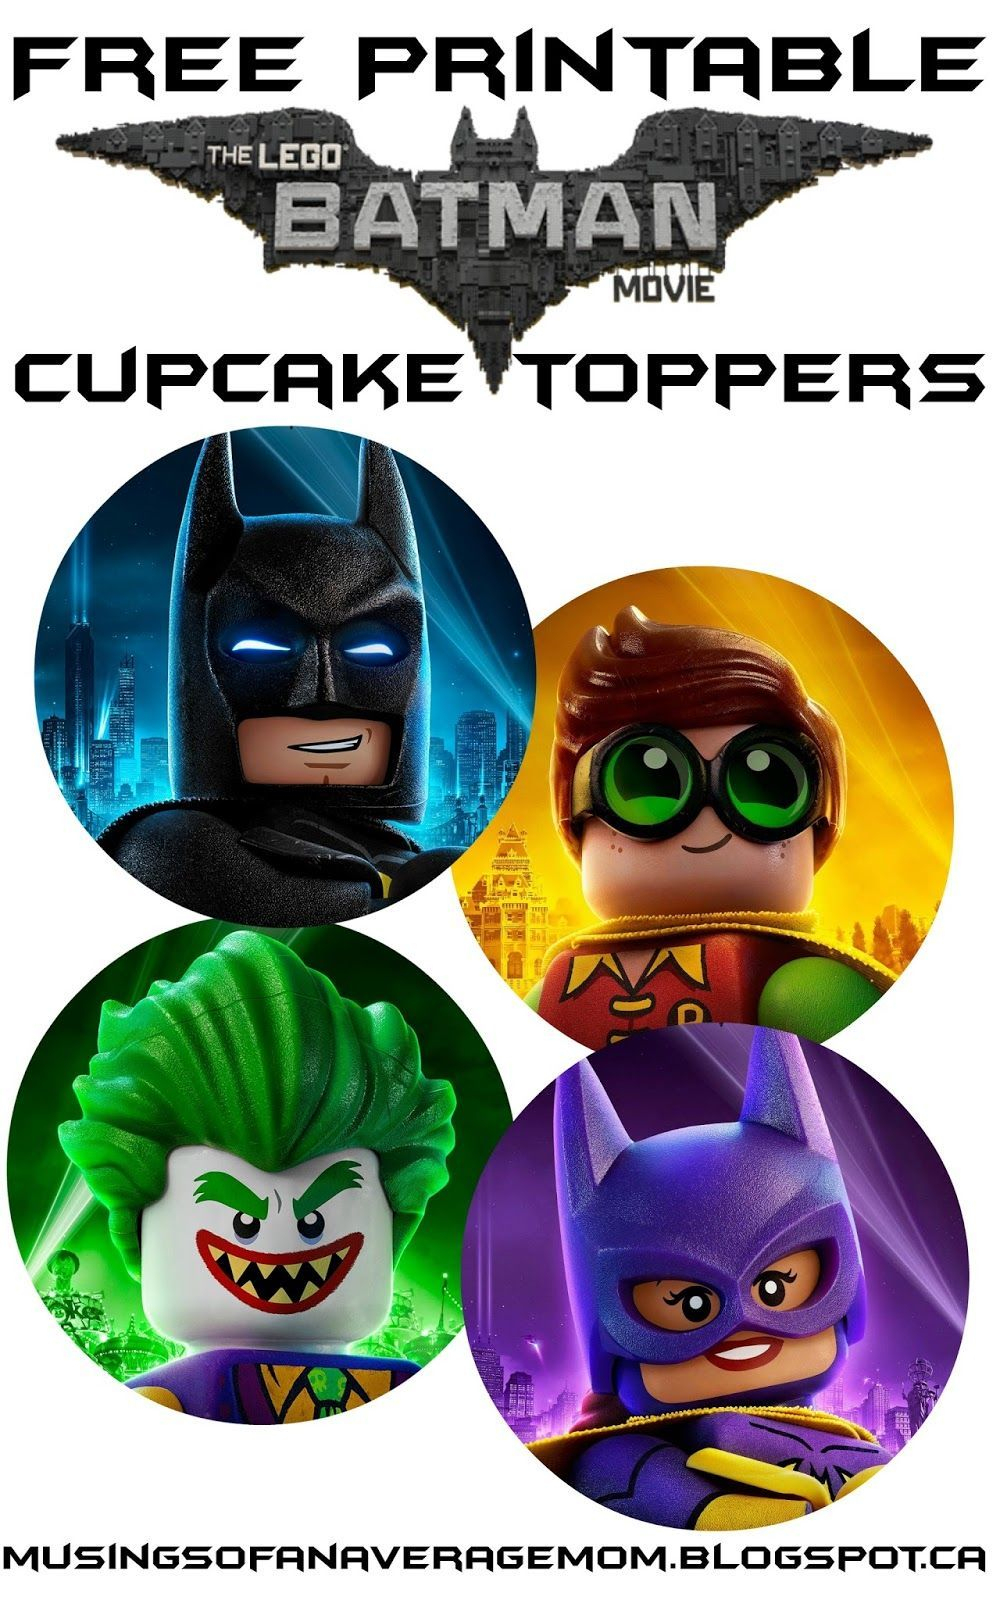 Free Lego Batman Cupcake Toppers | We Found These Great Pins - Free Printable Lego Batman